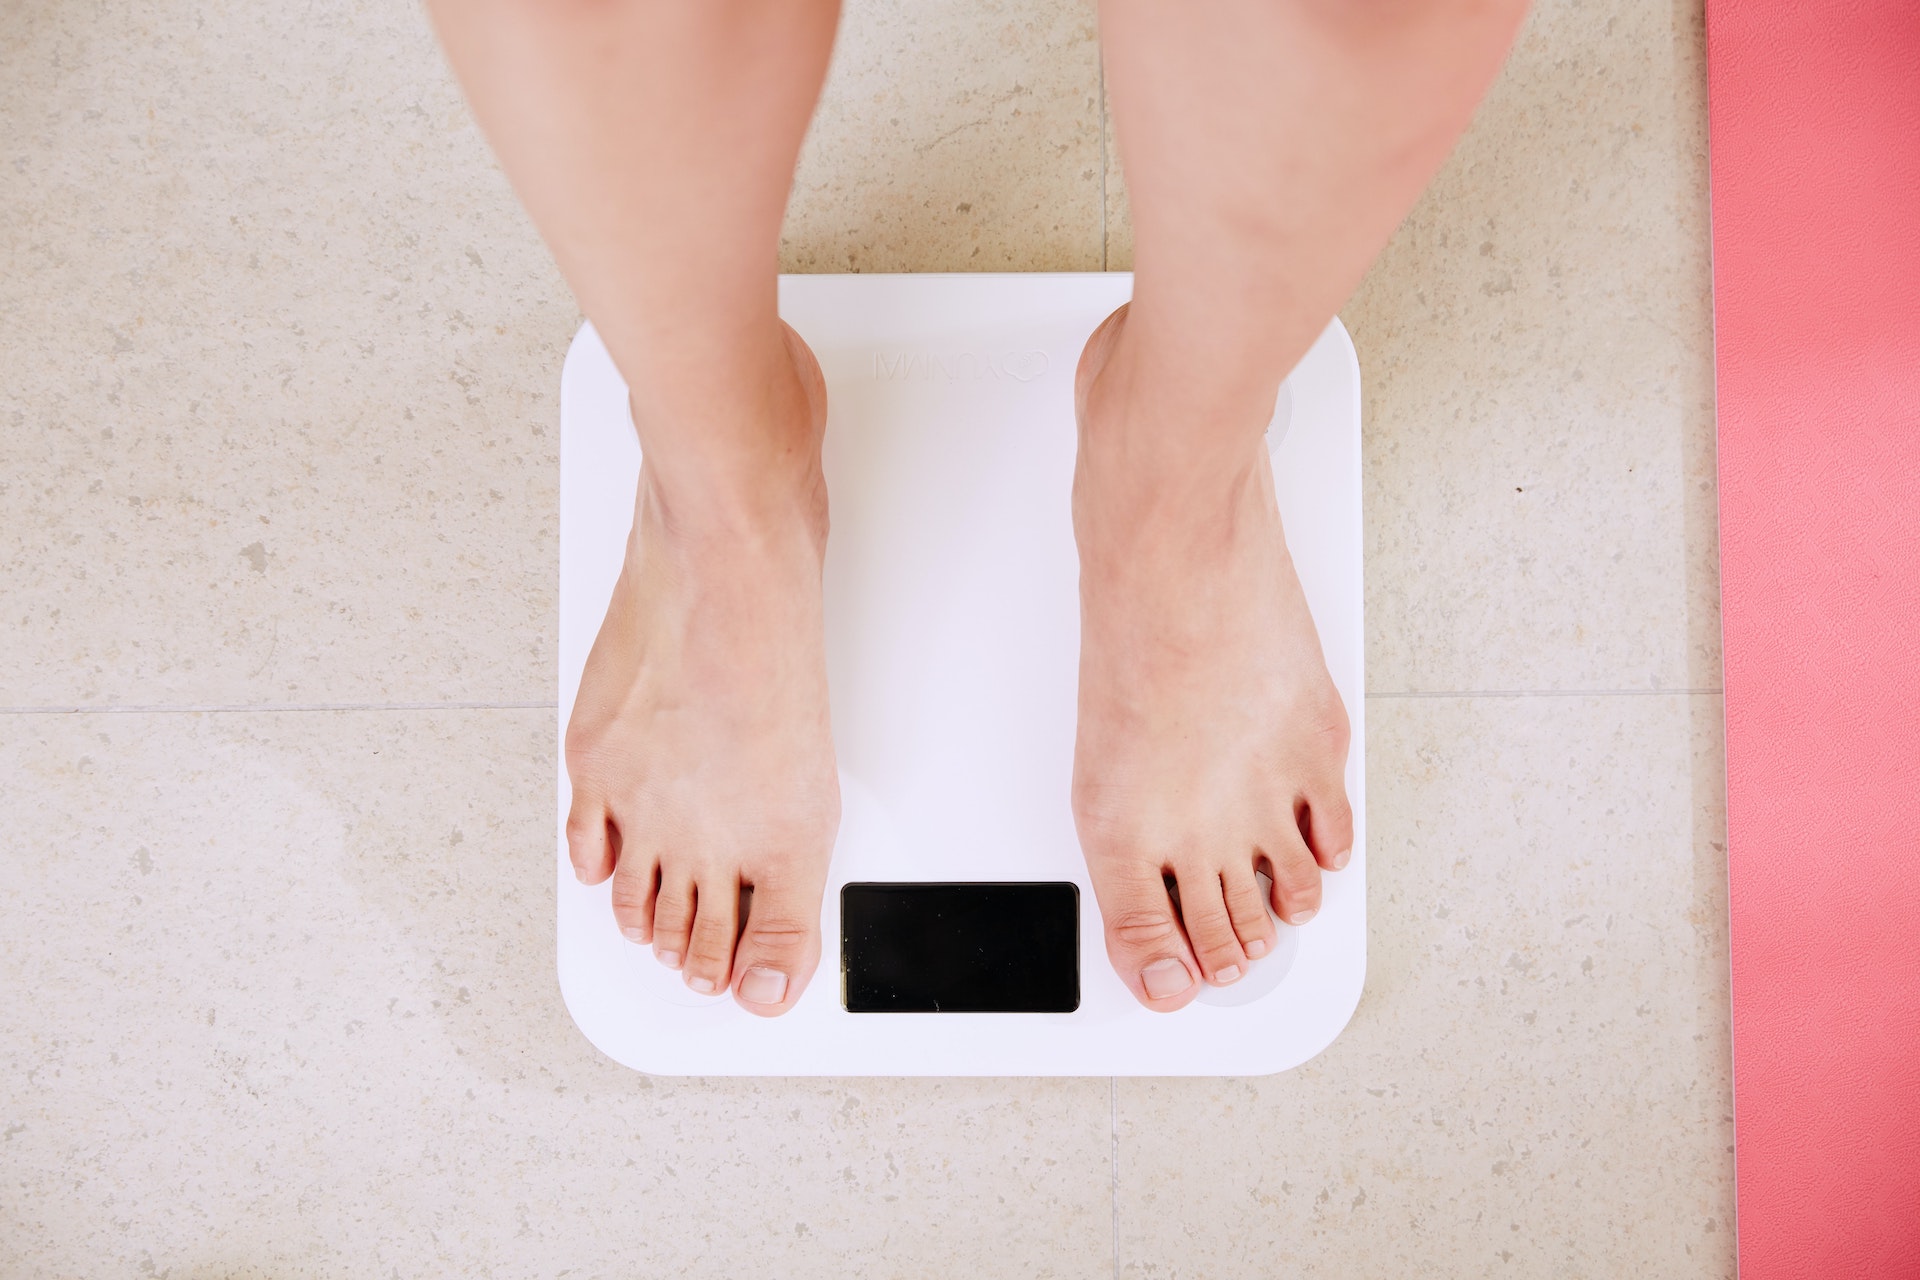 How do I overcome the fear of gaining weight again? : Dr. Omar Fonseca